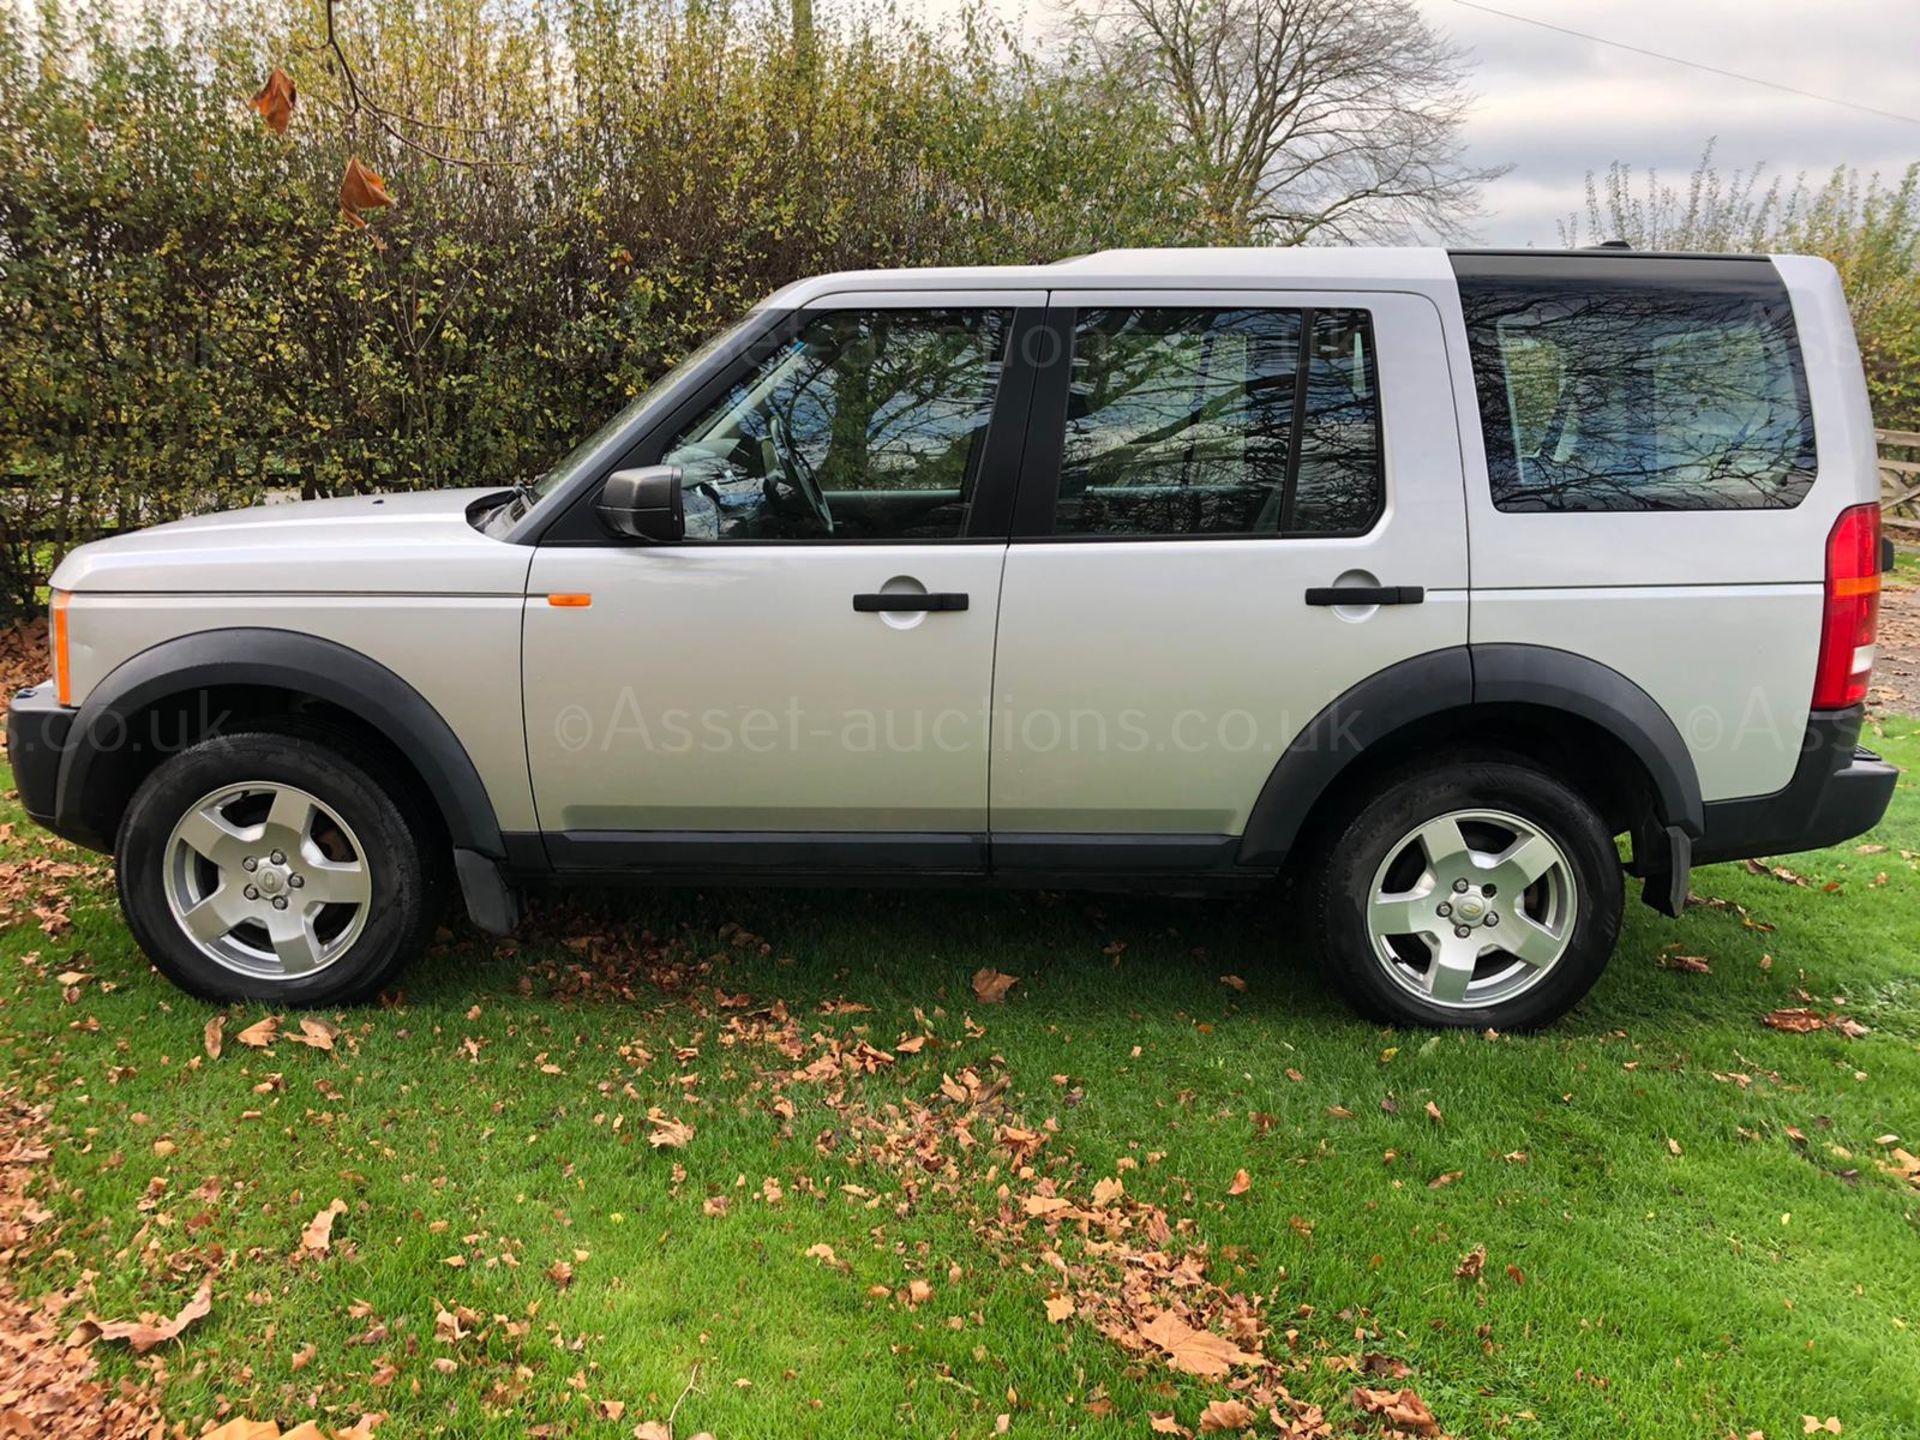 2005 LAND ROVER DISCOVERY 3 TDV6 S AUTO SILVER ESTATE, 146,941 MILES *NO VAT* - Image 4 of 17